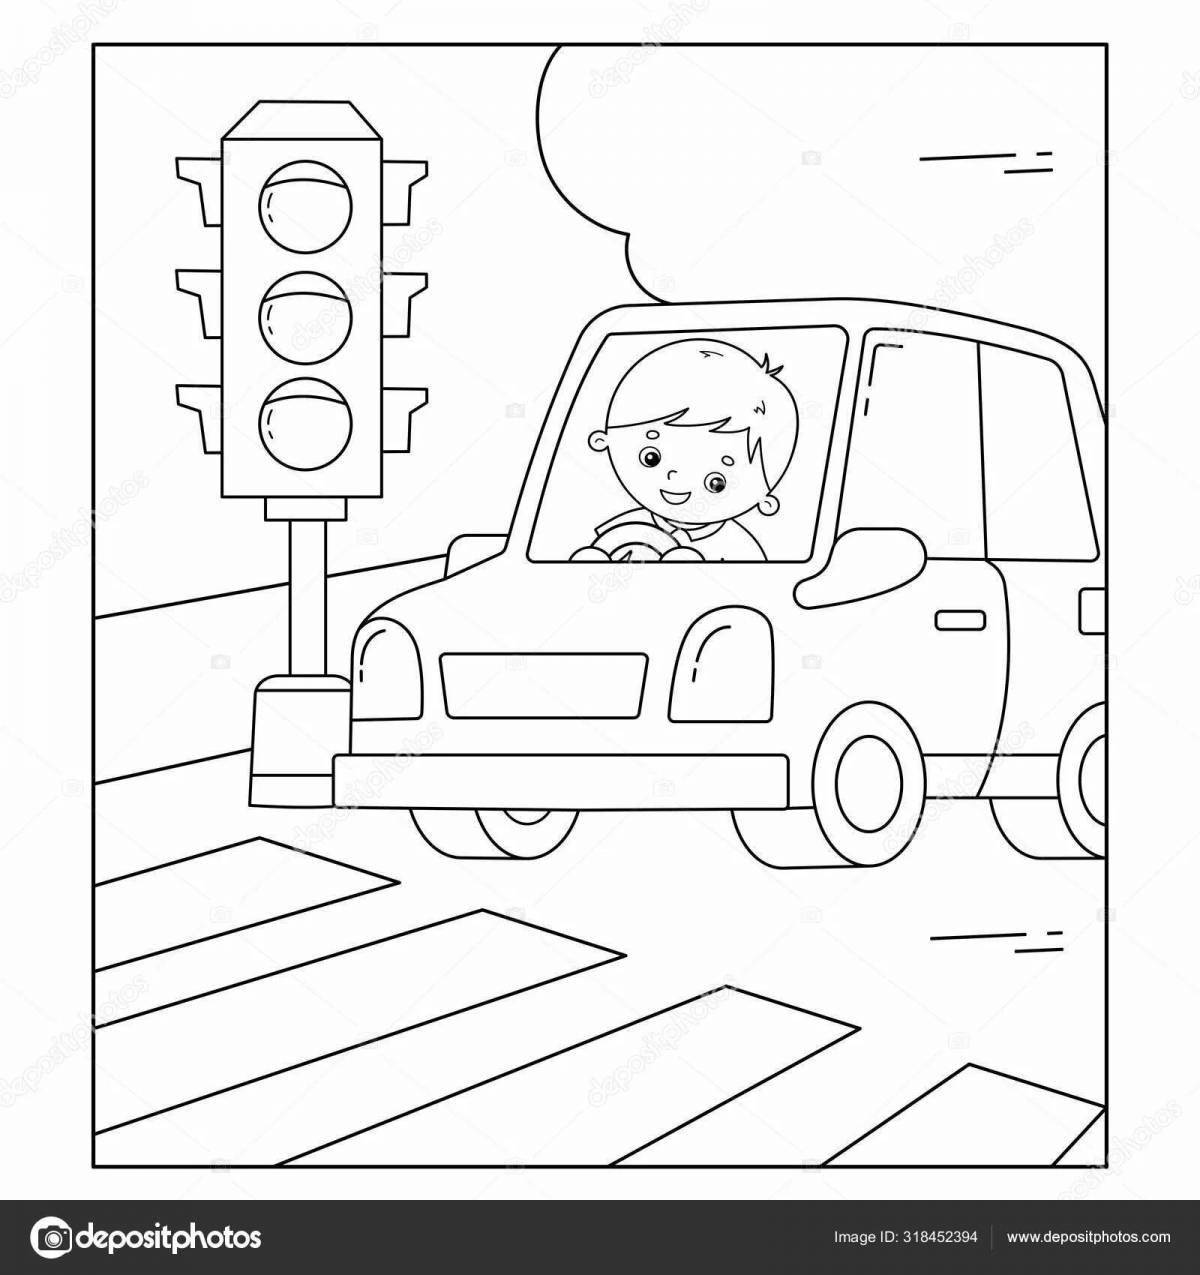 Colorful traffic light coloring book for preschoolers